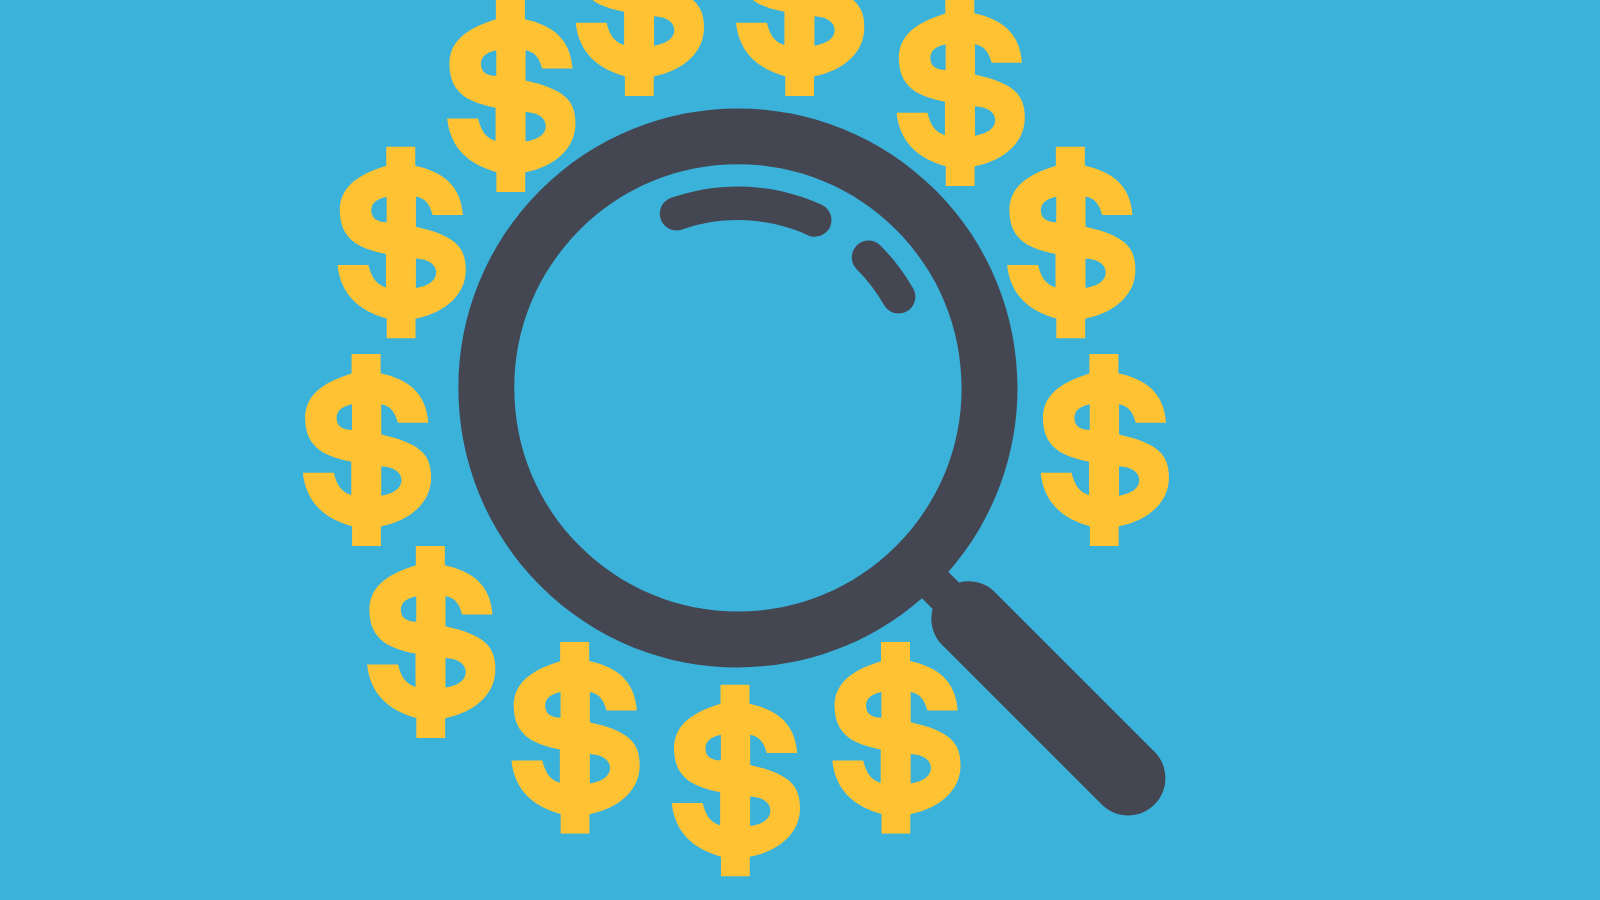 A magnifying glass surrounded by dollar signs